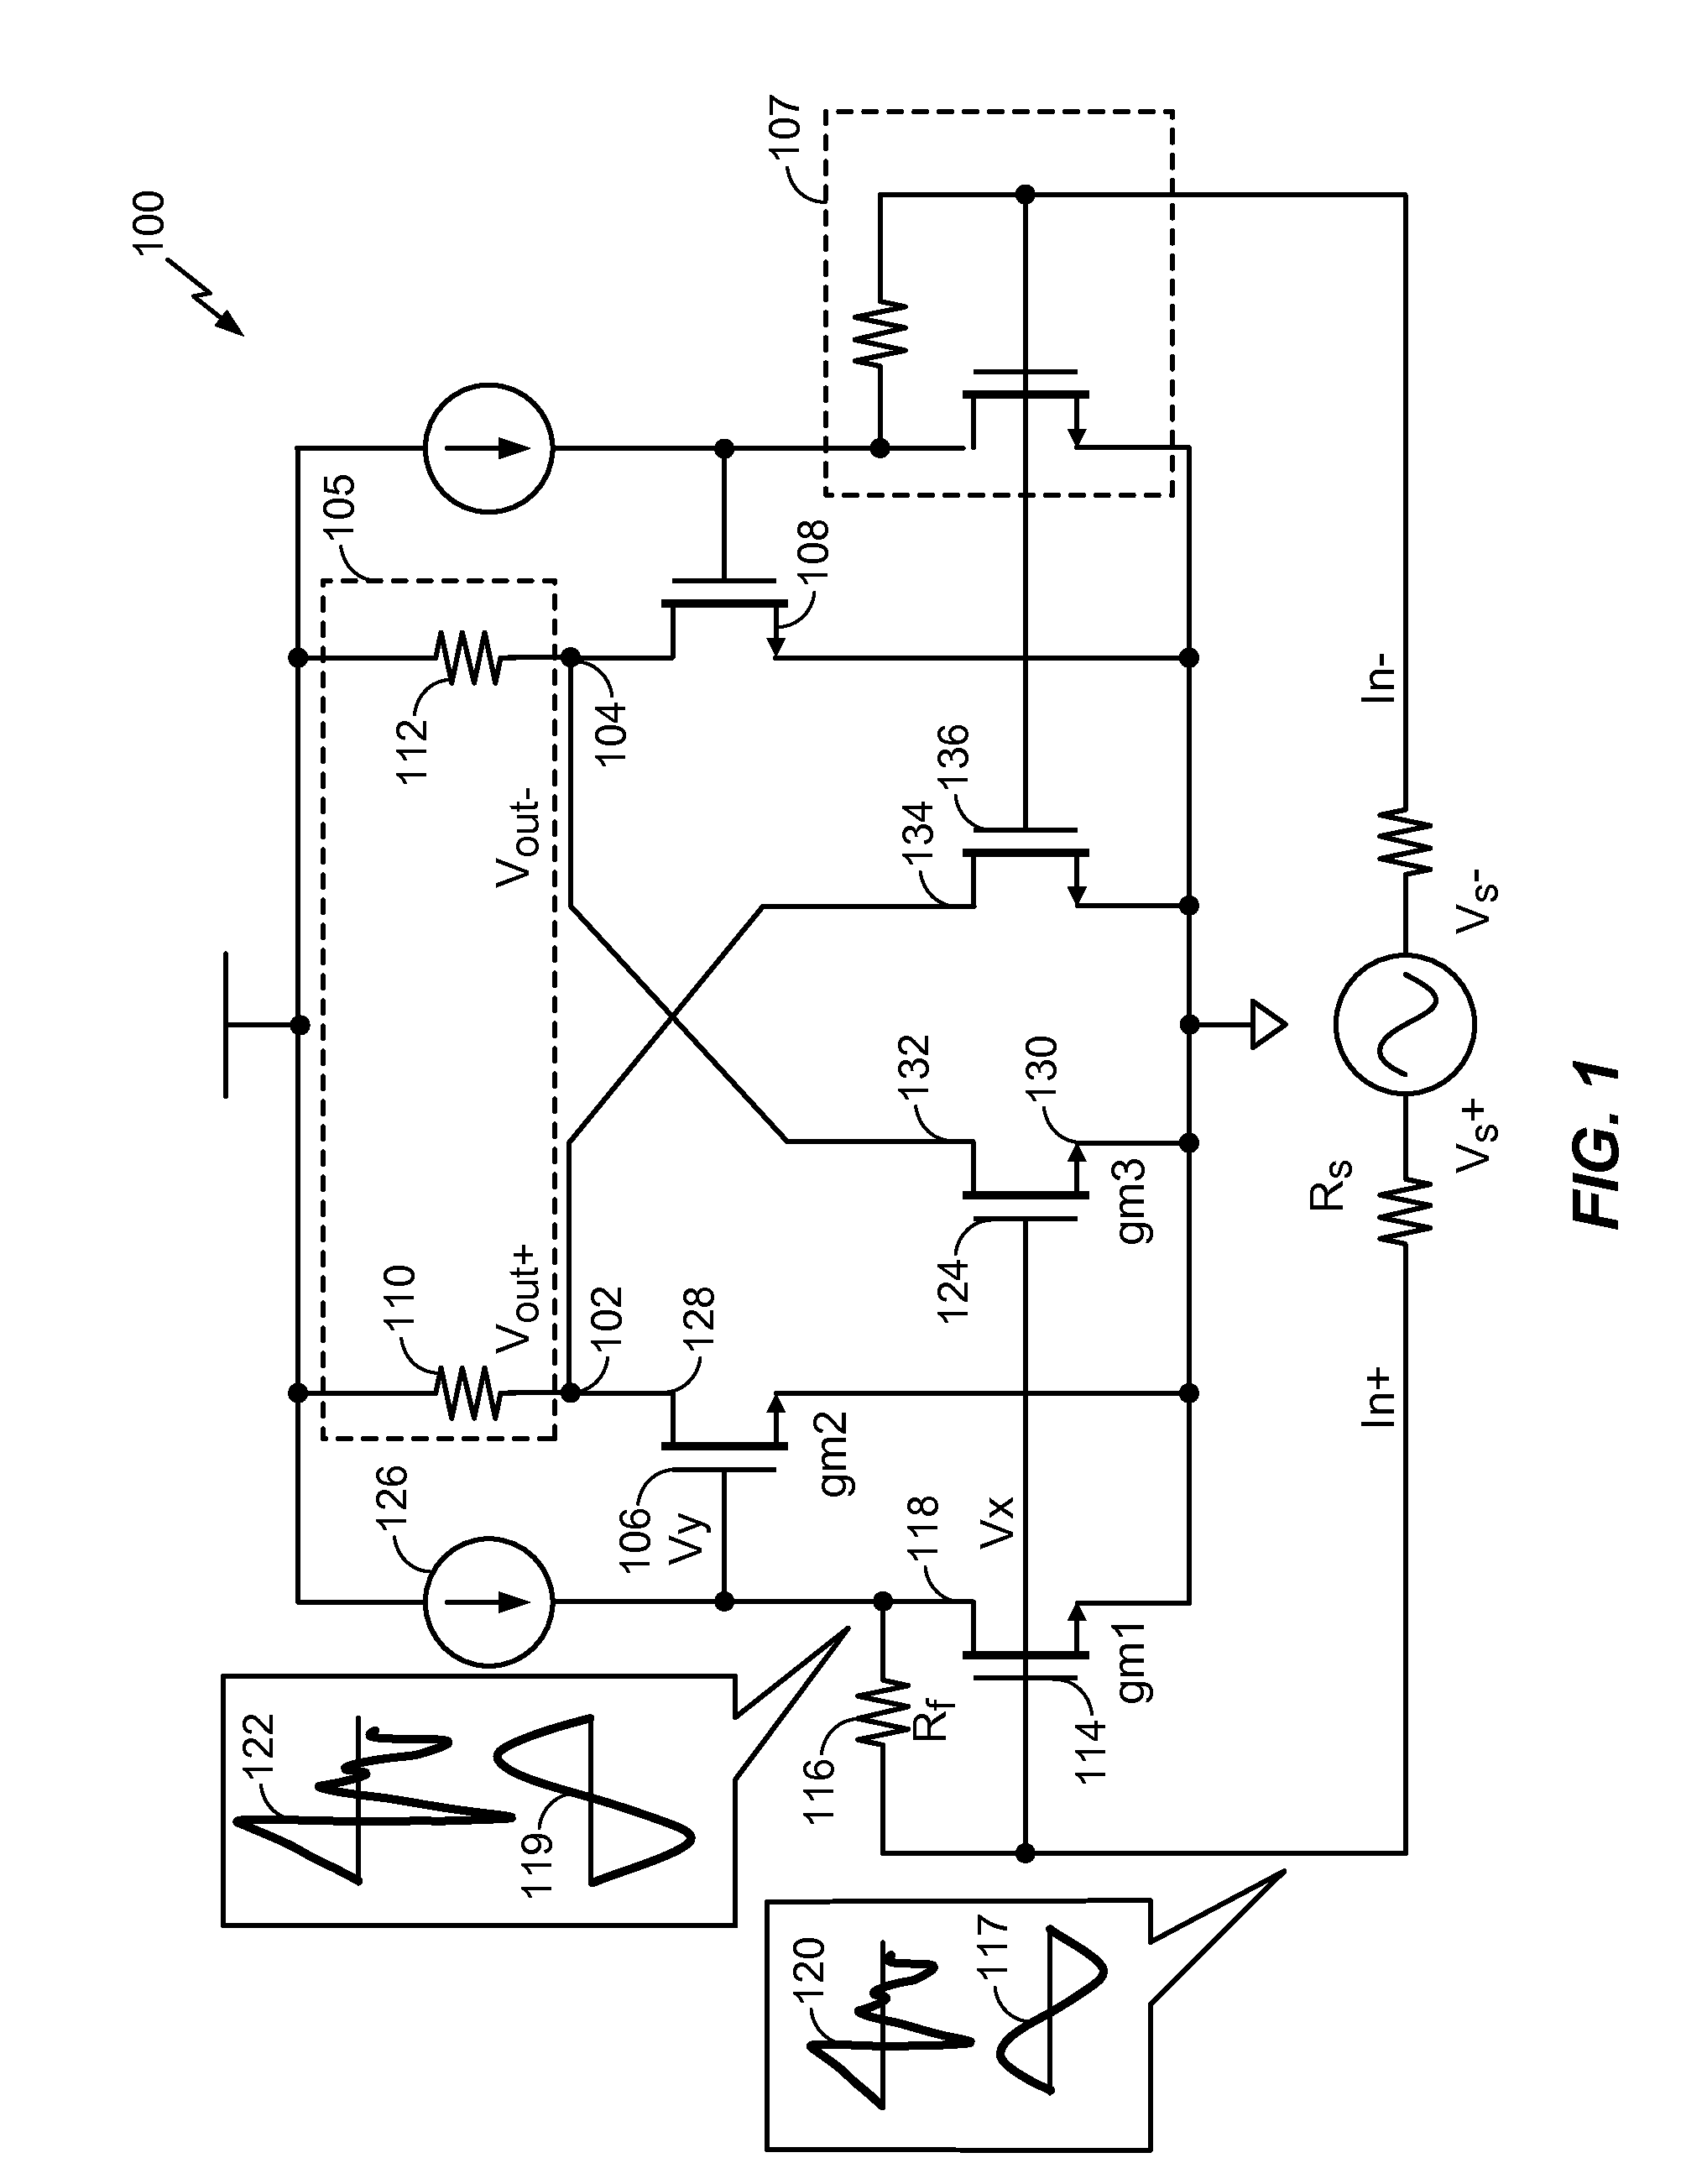 Method and Apparatus for Broadband Input Matching with Noise and Non-Linearity Cancellation in Power Amplifiers